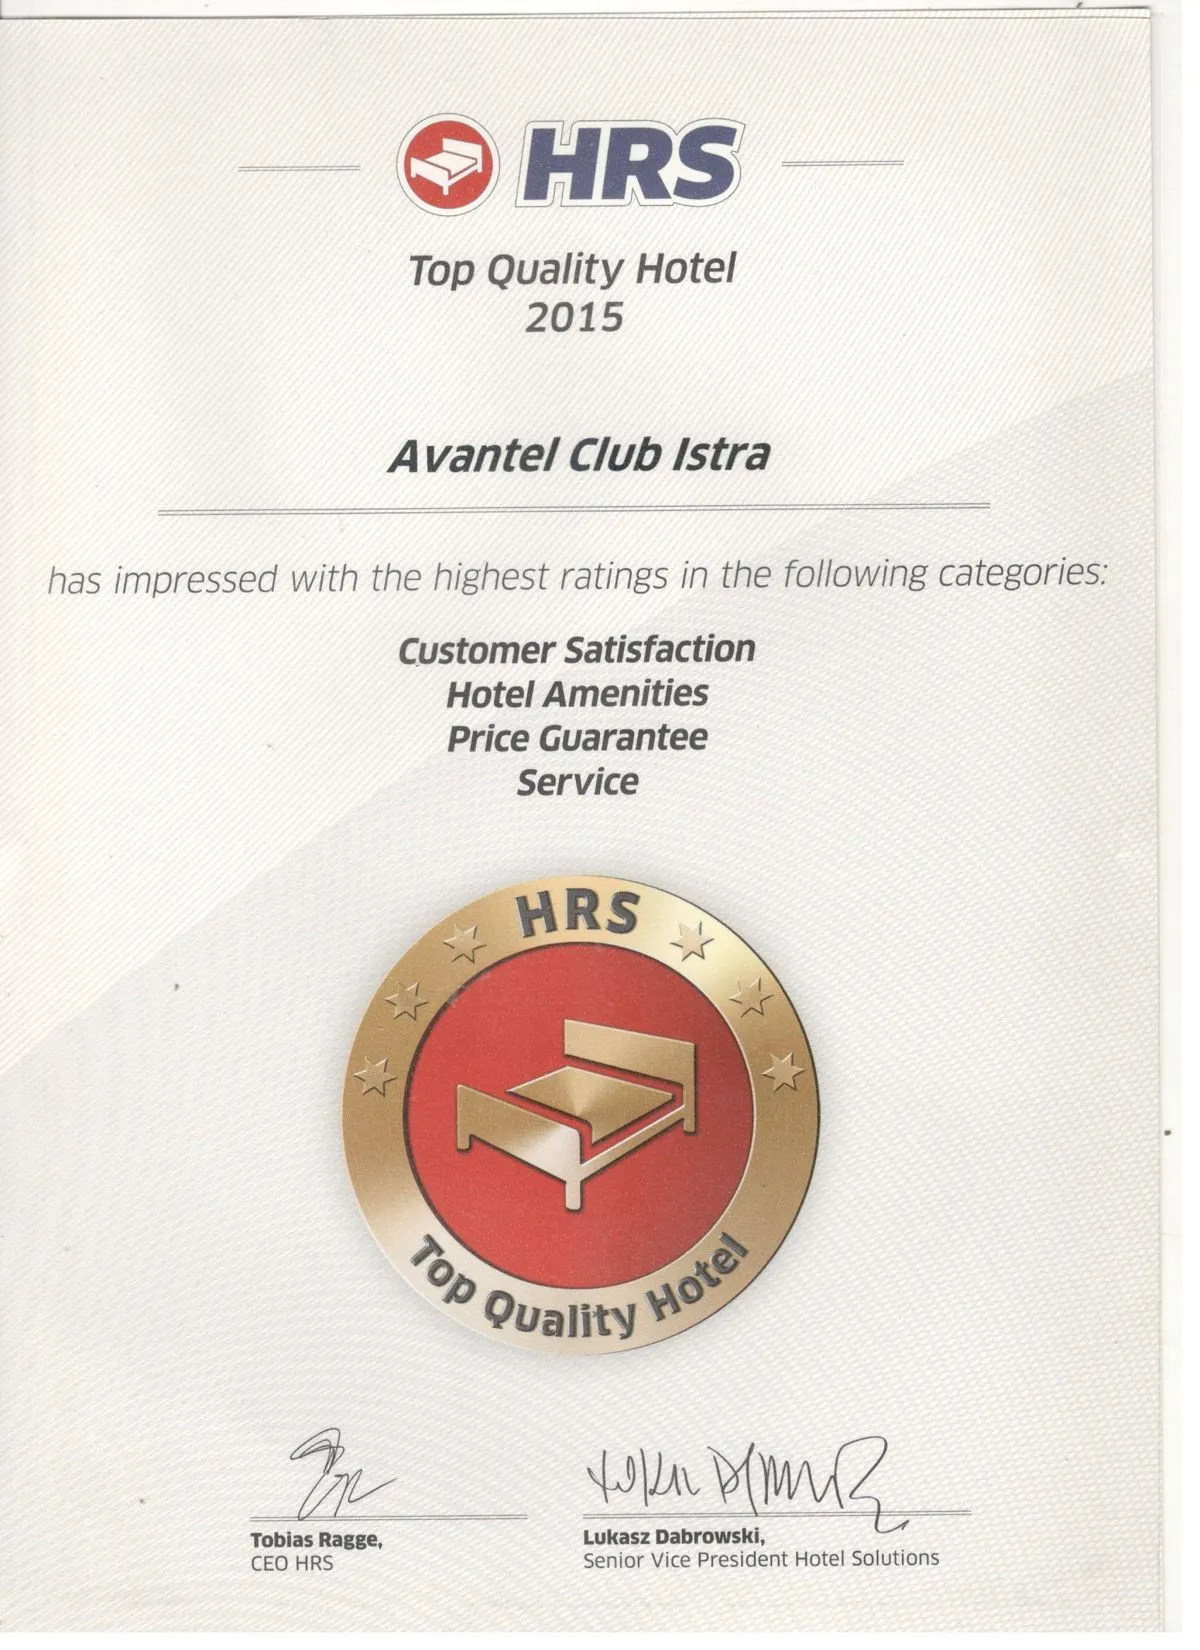 HRS, Top Quality Hotel 2015